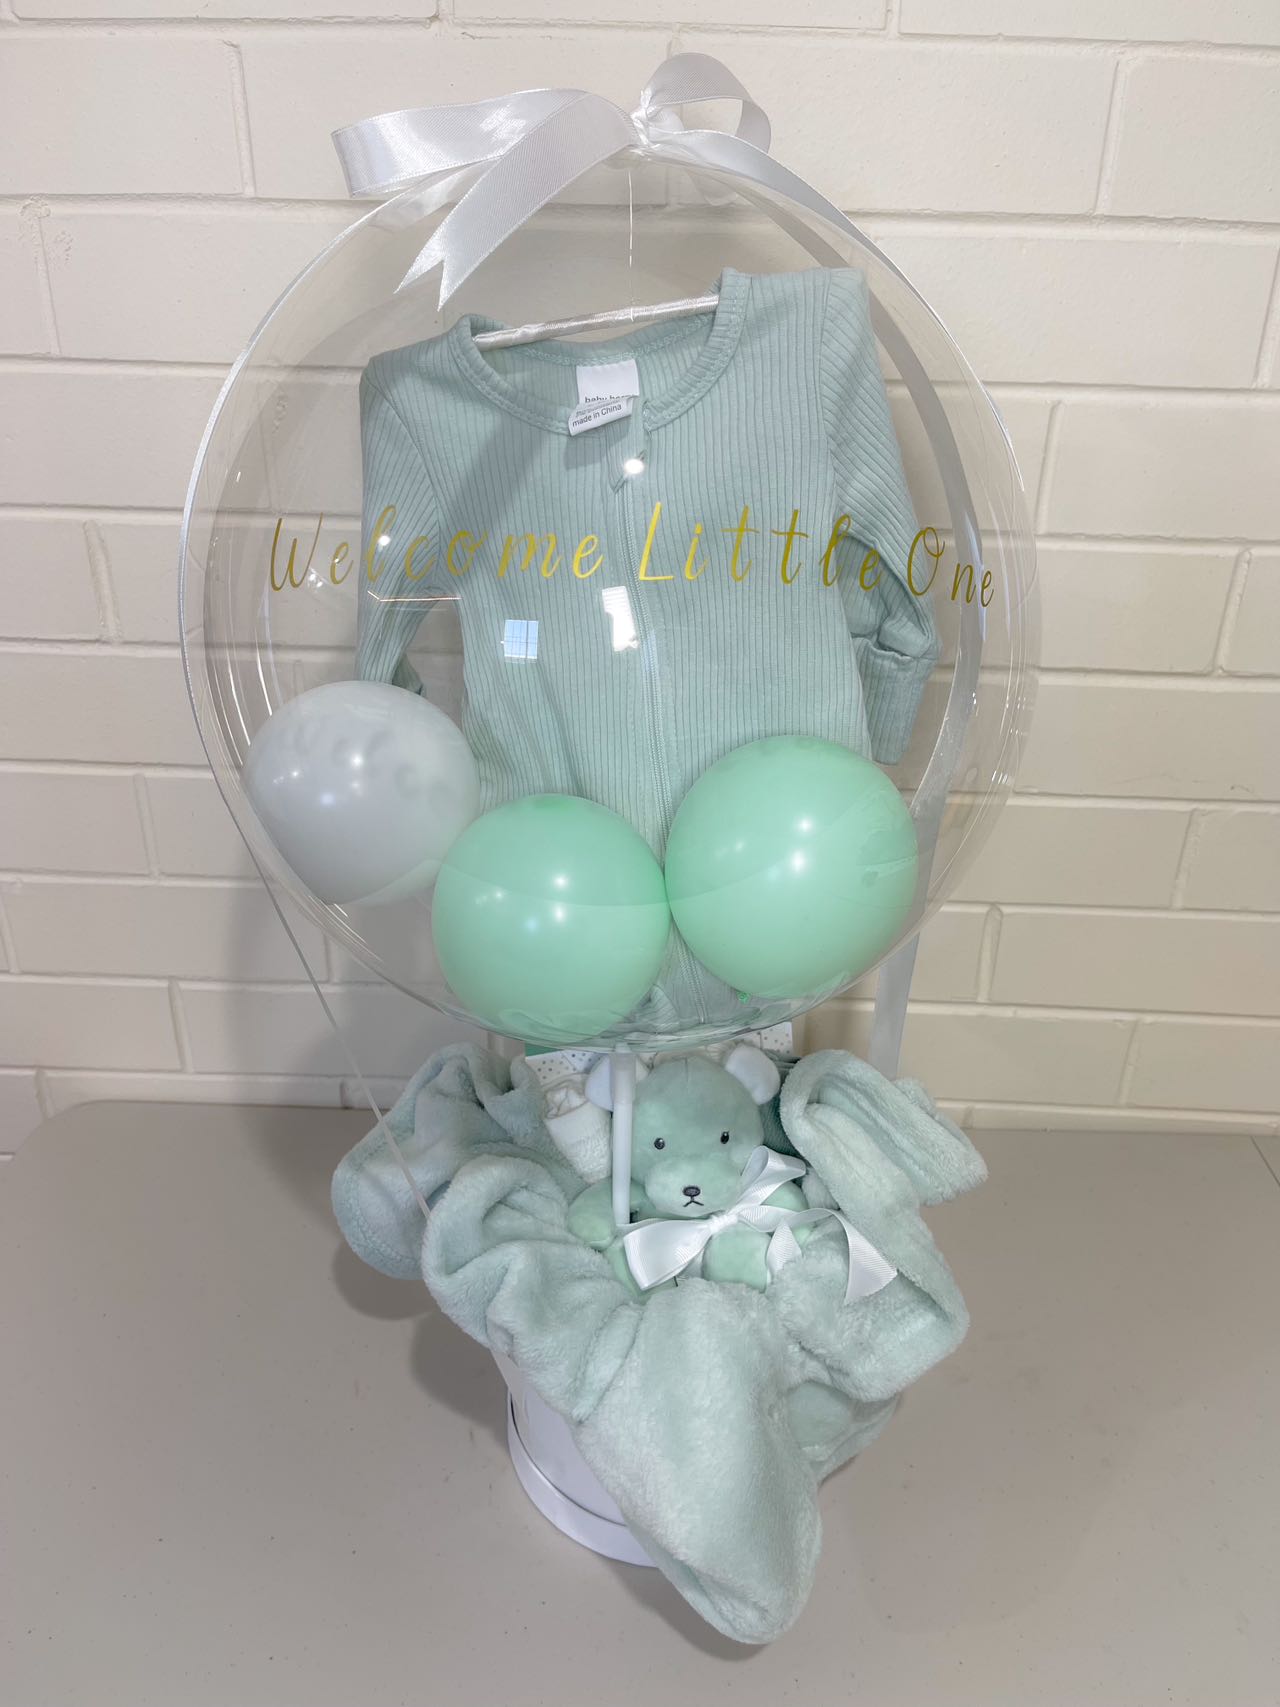 Welcome New Baby Balloon & Hatbox 🎉